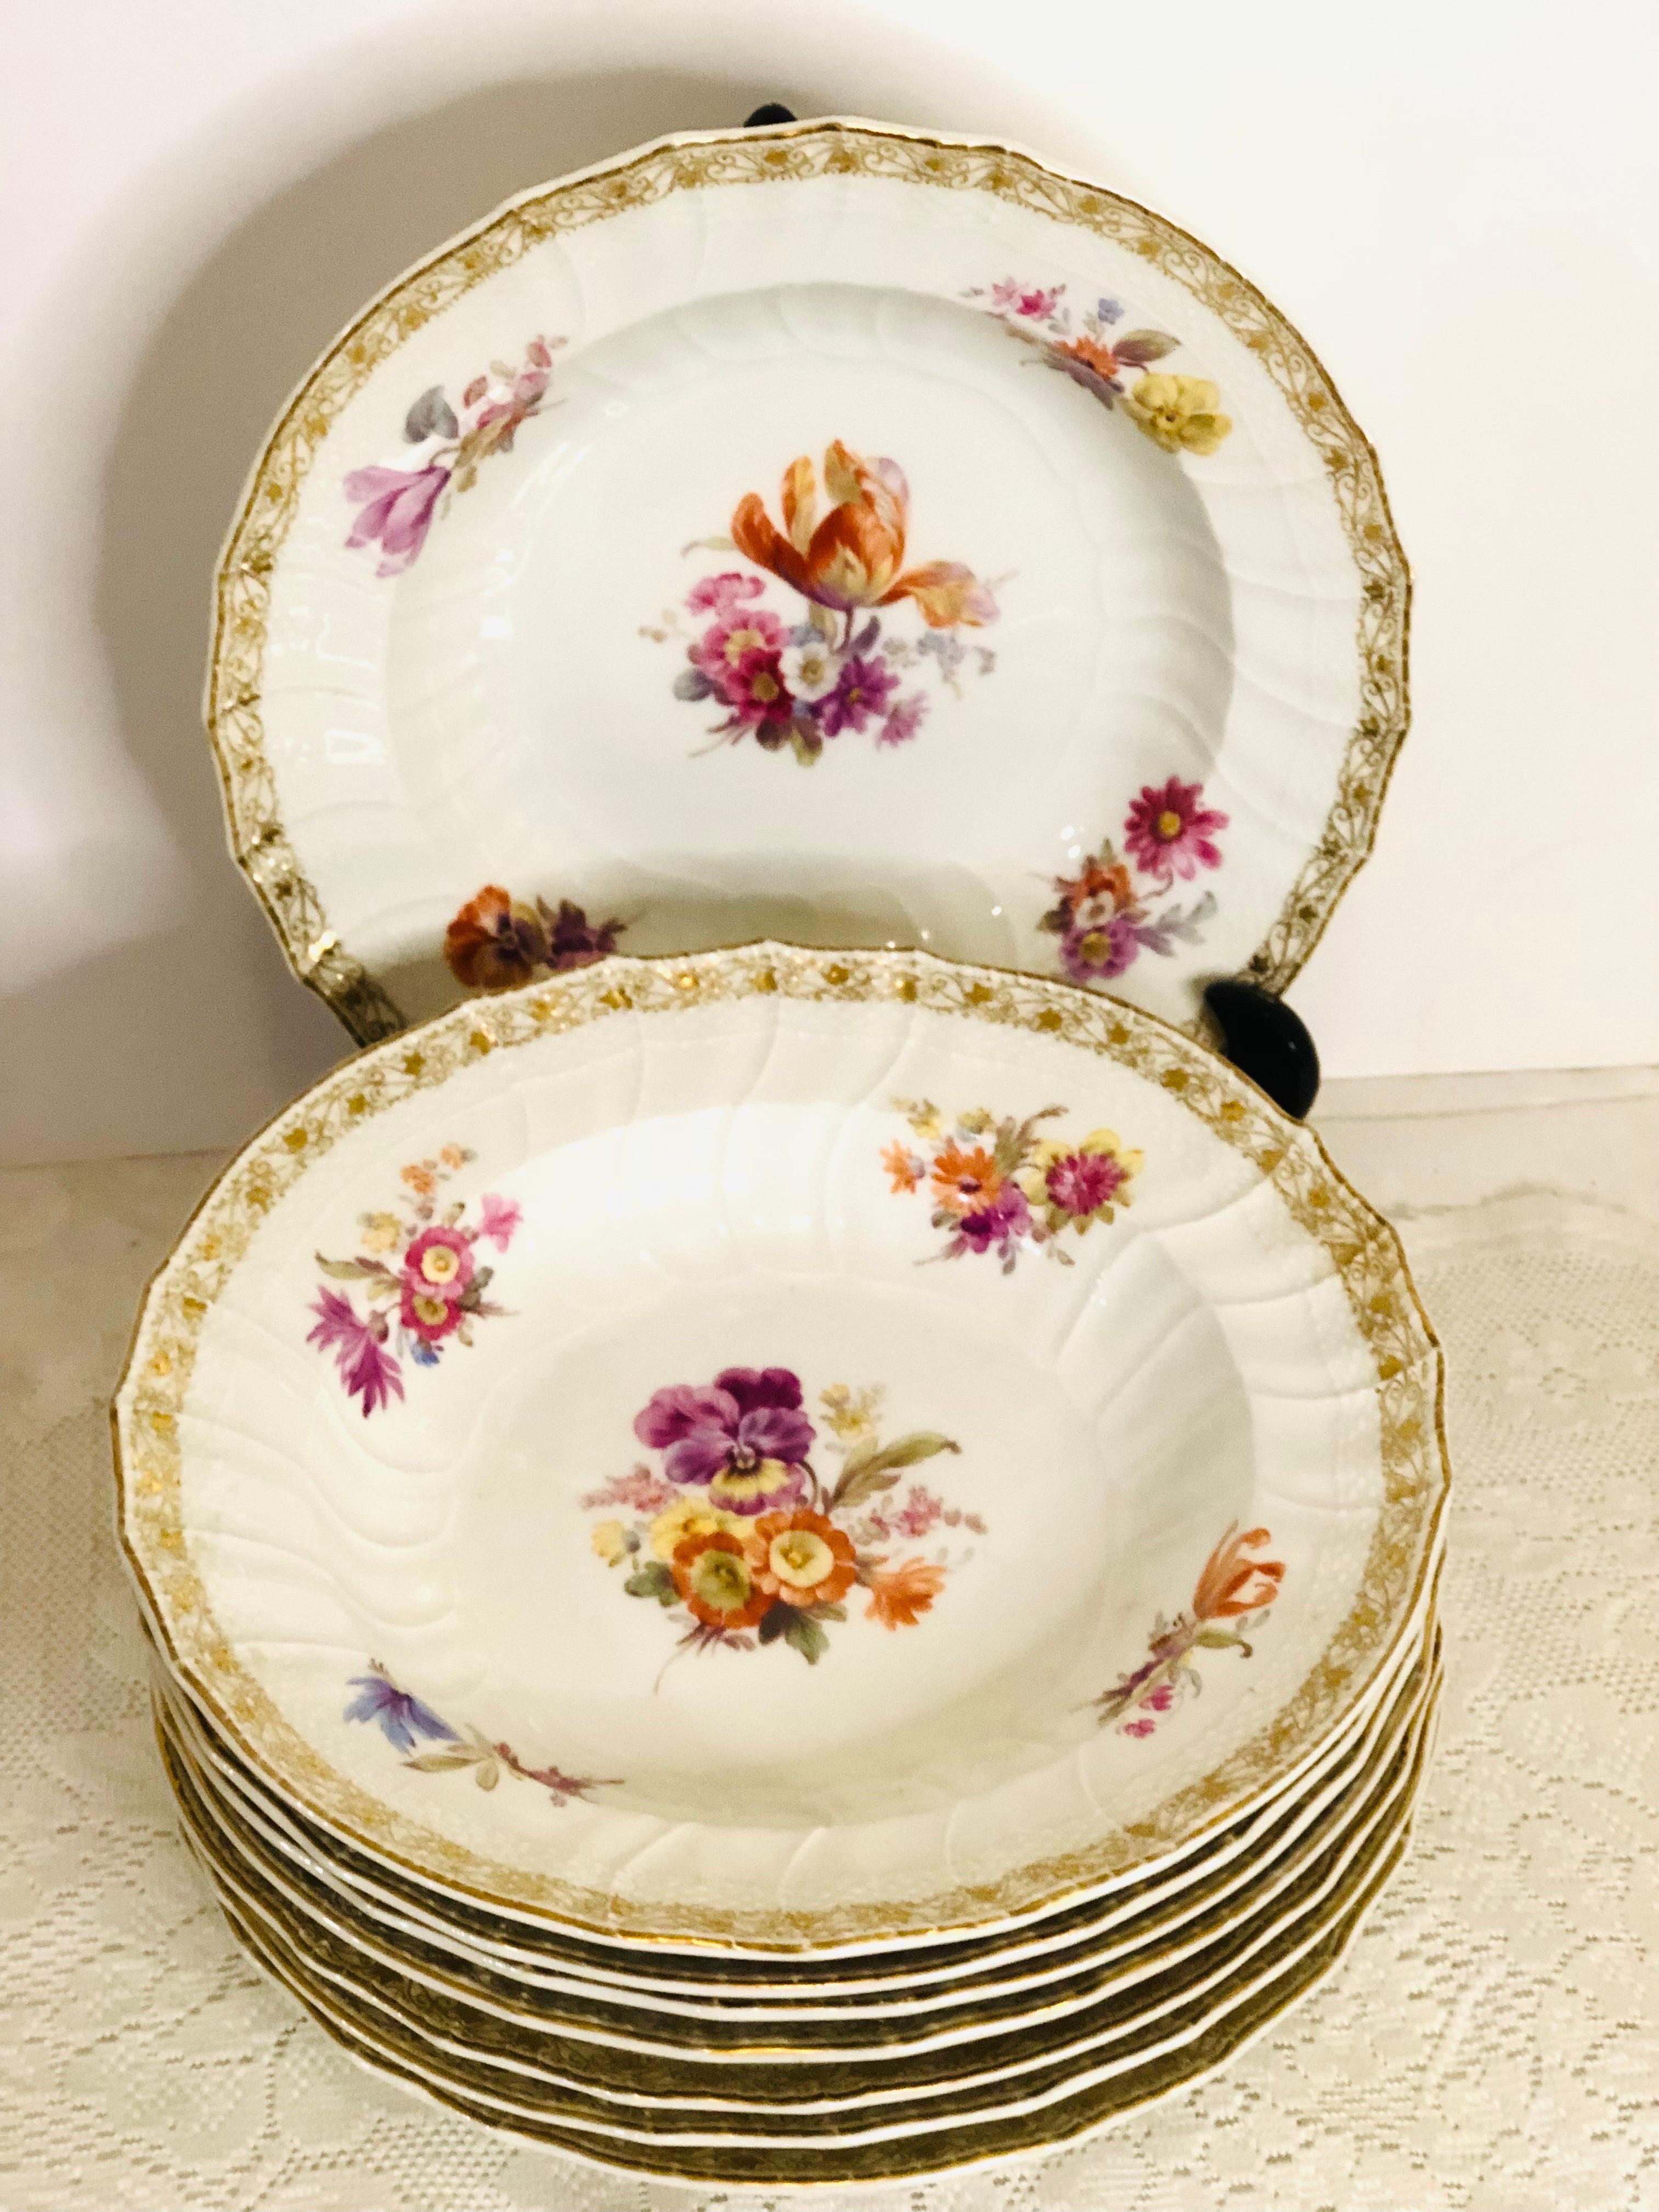 Set of eight beautiful KPM wide rim soup bowls with different central museum quality hand-painted floral bouquets on each bowl. KPM is also known as the Konigliche Porzellan-Manufaktur of Germany. They had very talented artists who did an